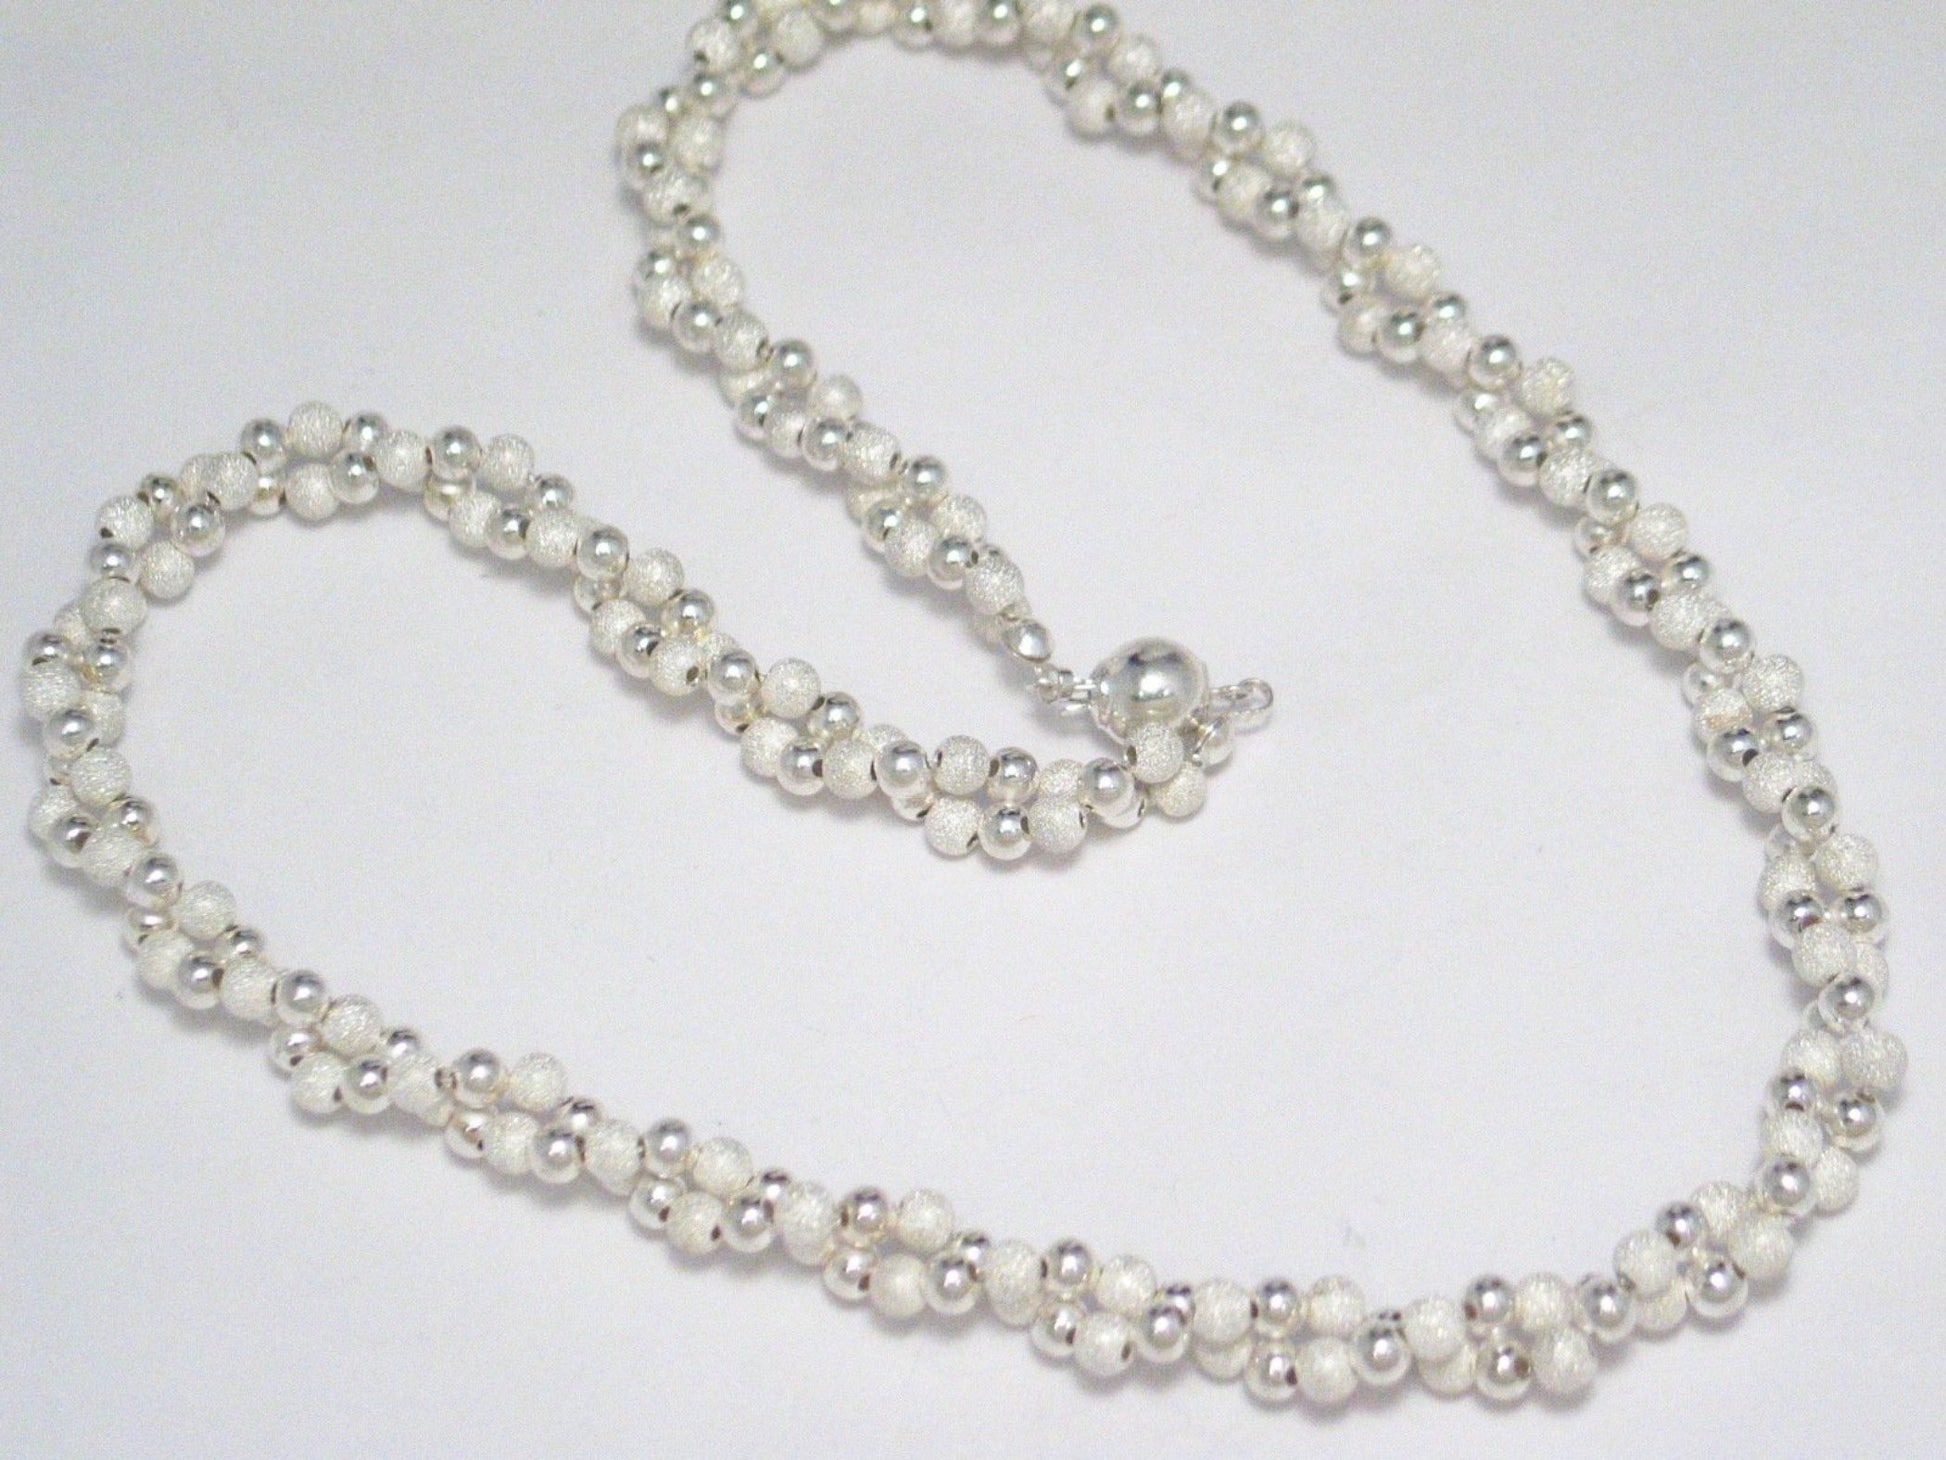 2 Strand Necklace, Womens 18" Sandblasted Design Sterling Silver Necklace